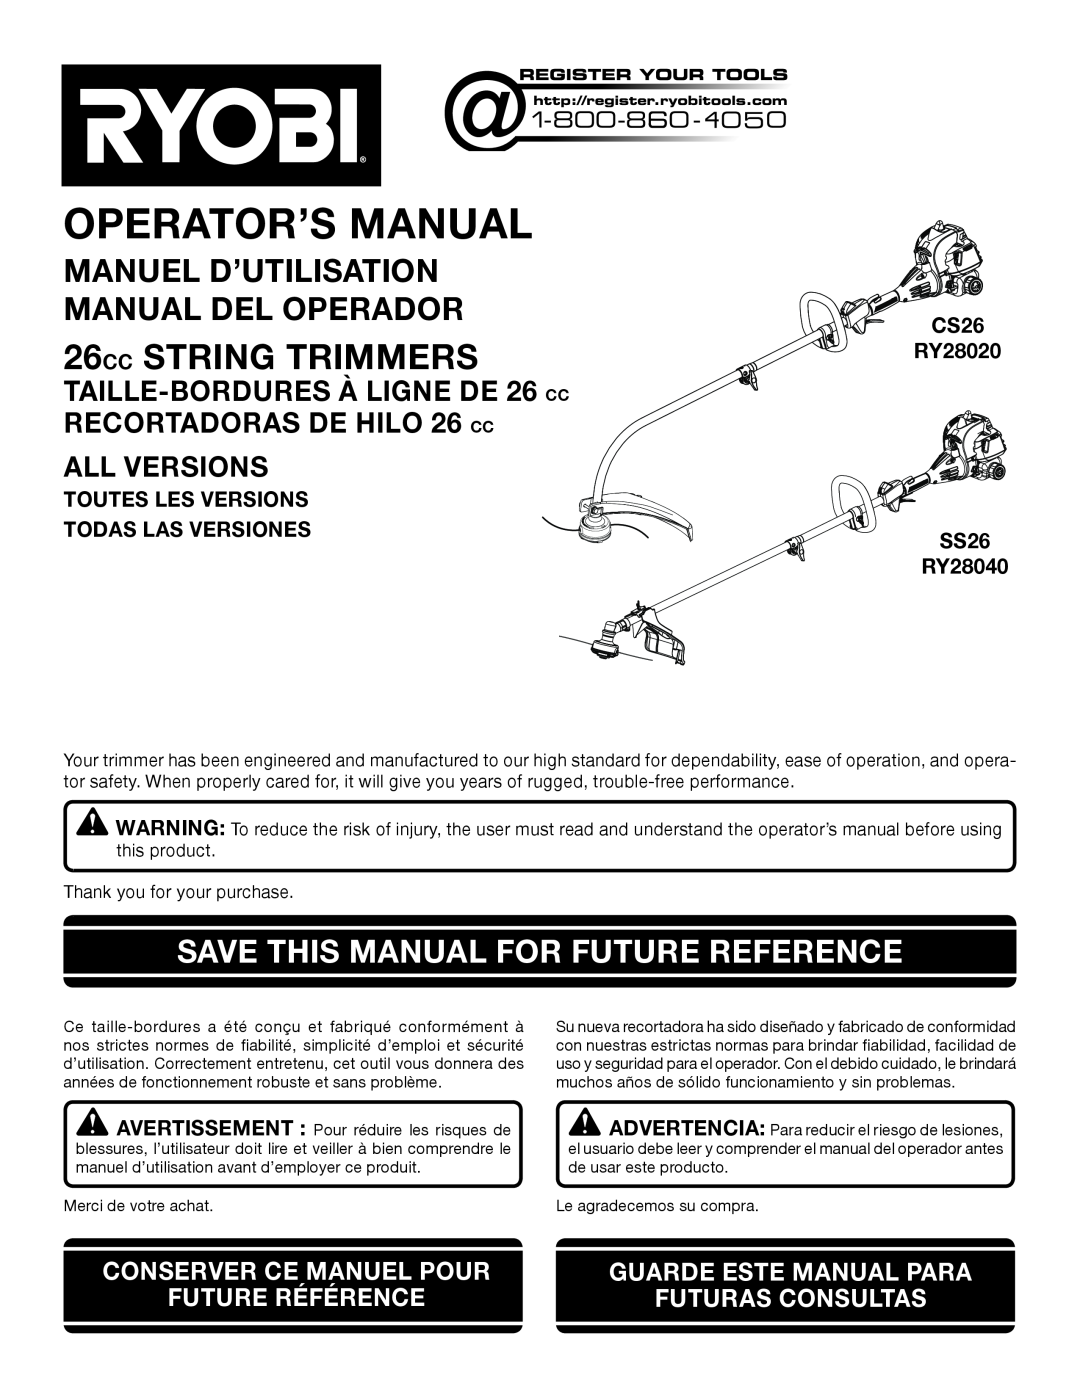 Ryobi SS26 RY28040 manuel dutilisation 26CC STRING TRIMMERS, Save This Manual For Future Reference, All Versions 